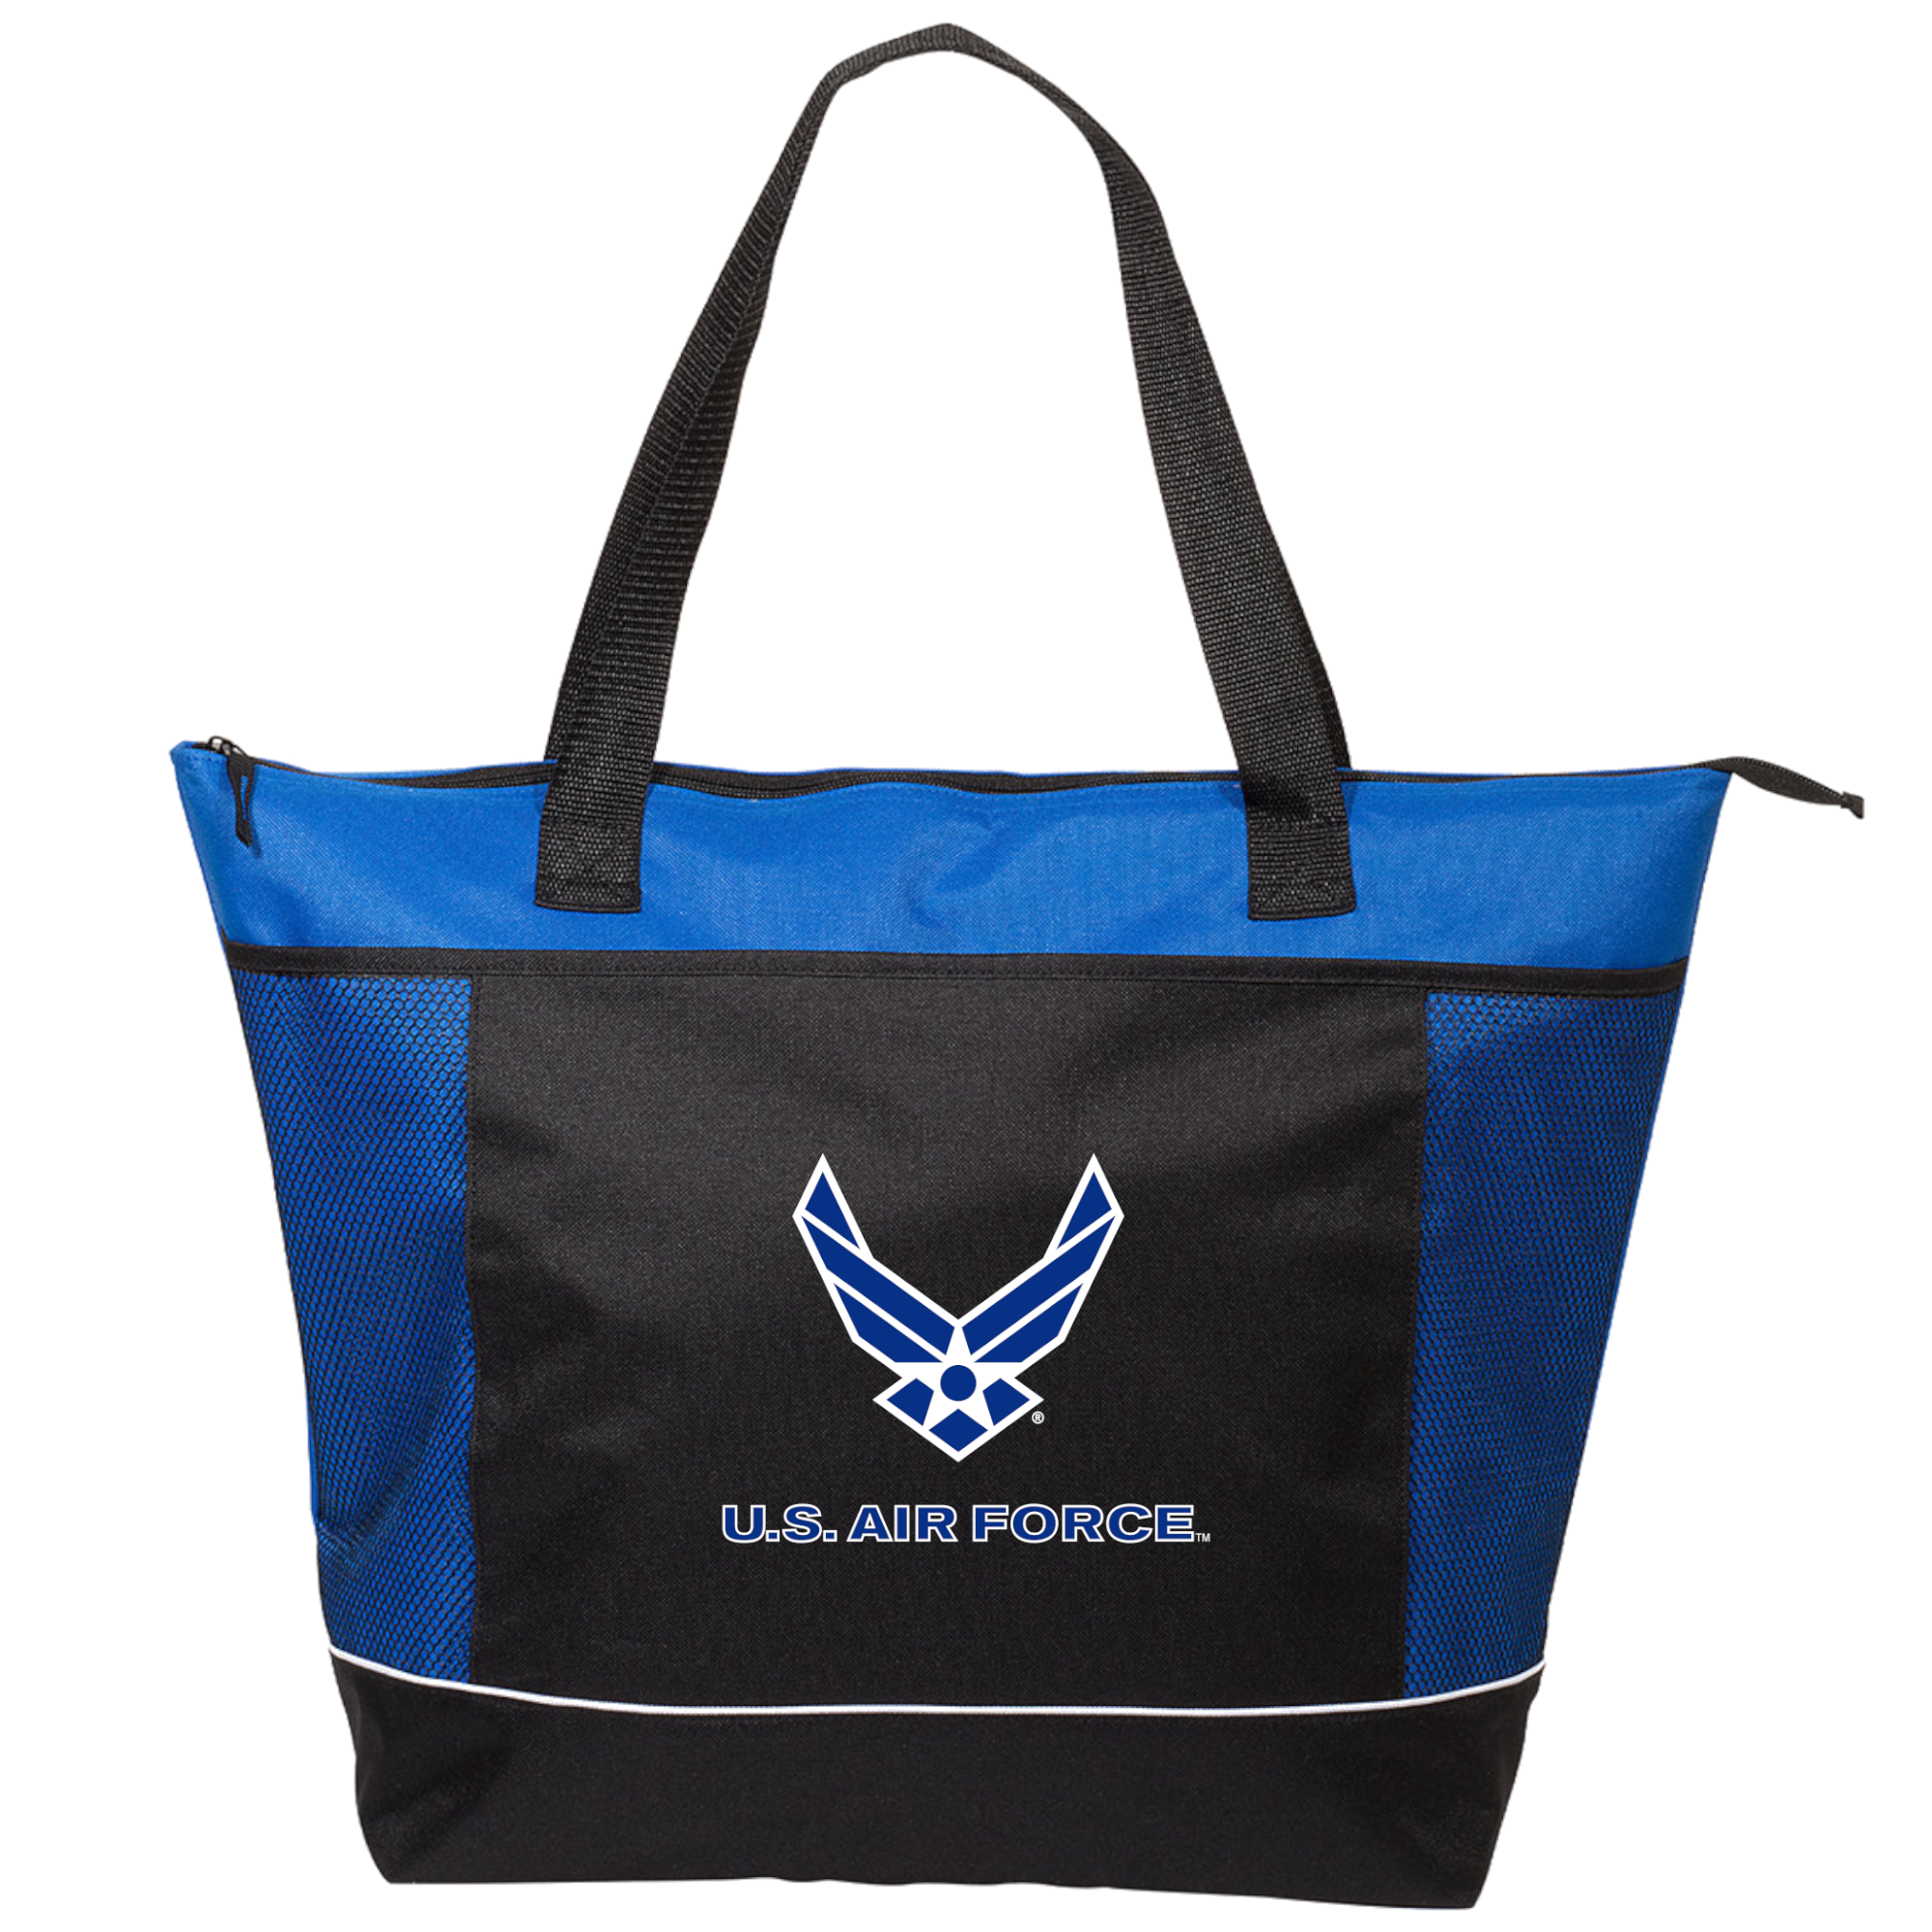 Air Force Shopping Cooler Tote (Blue)